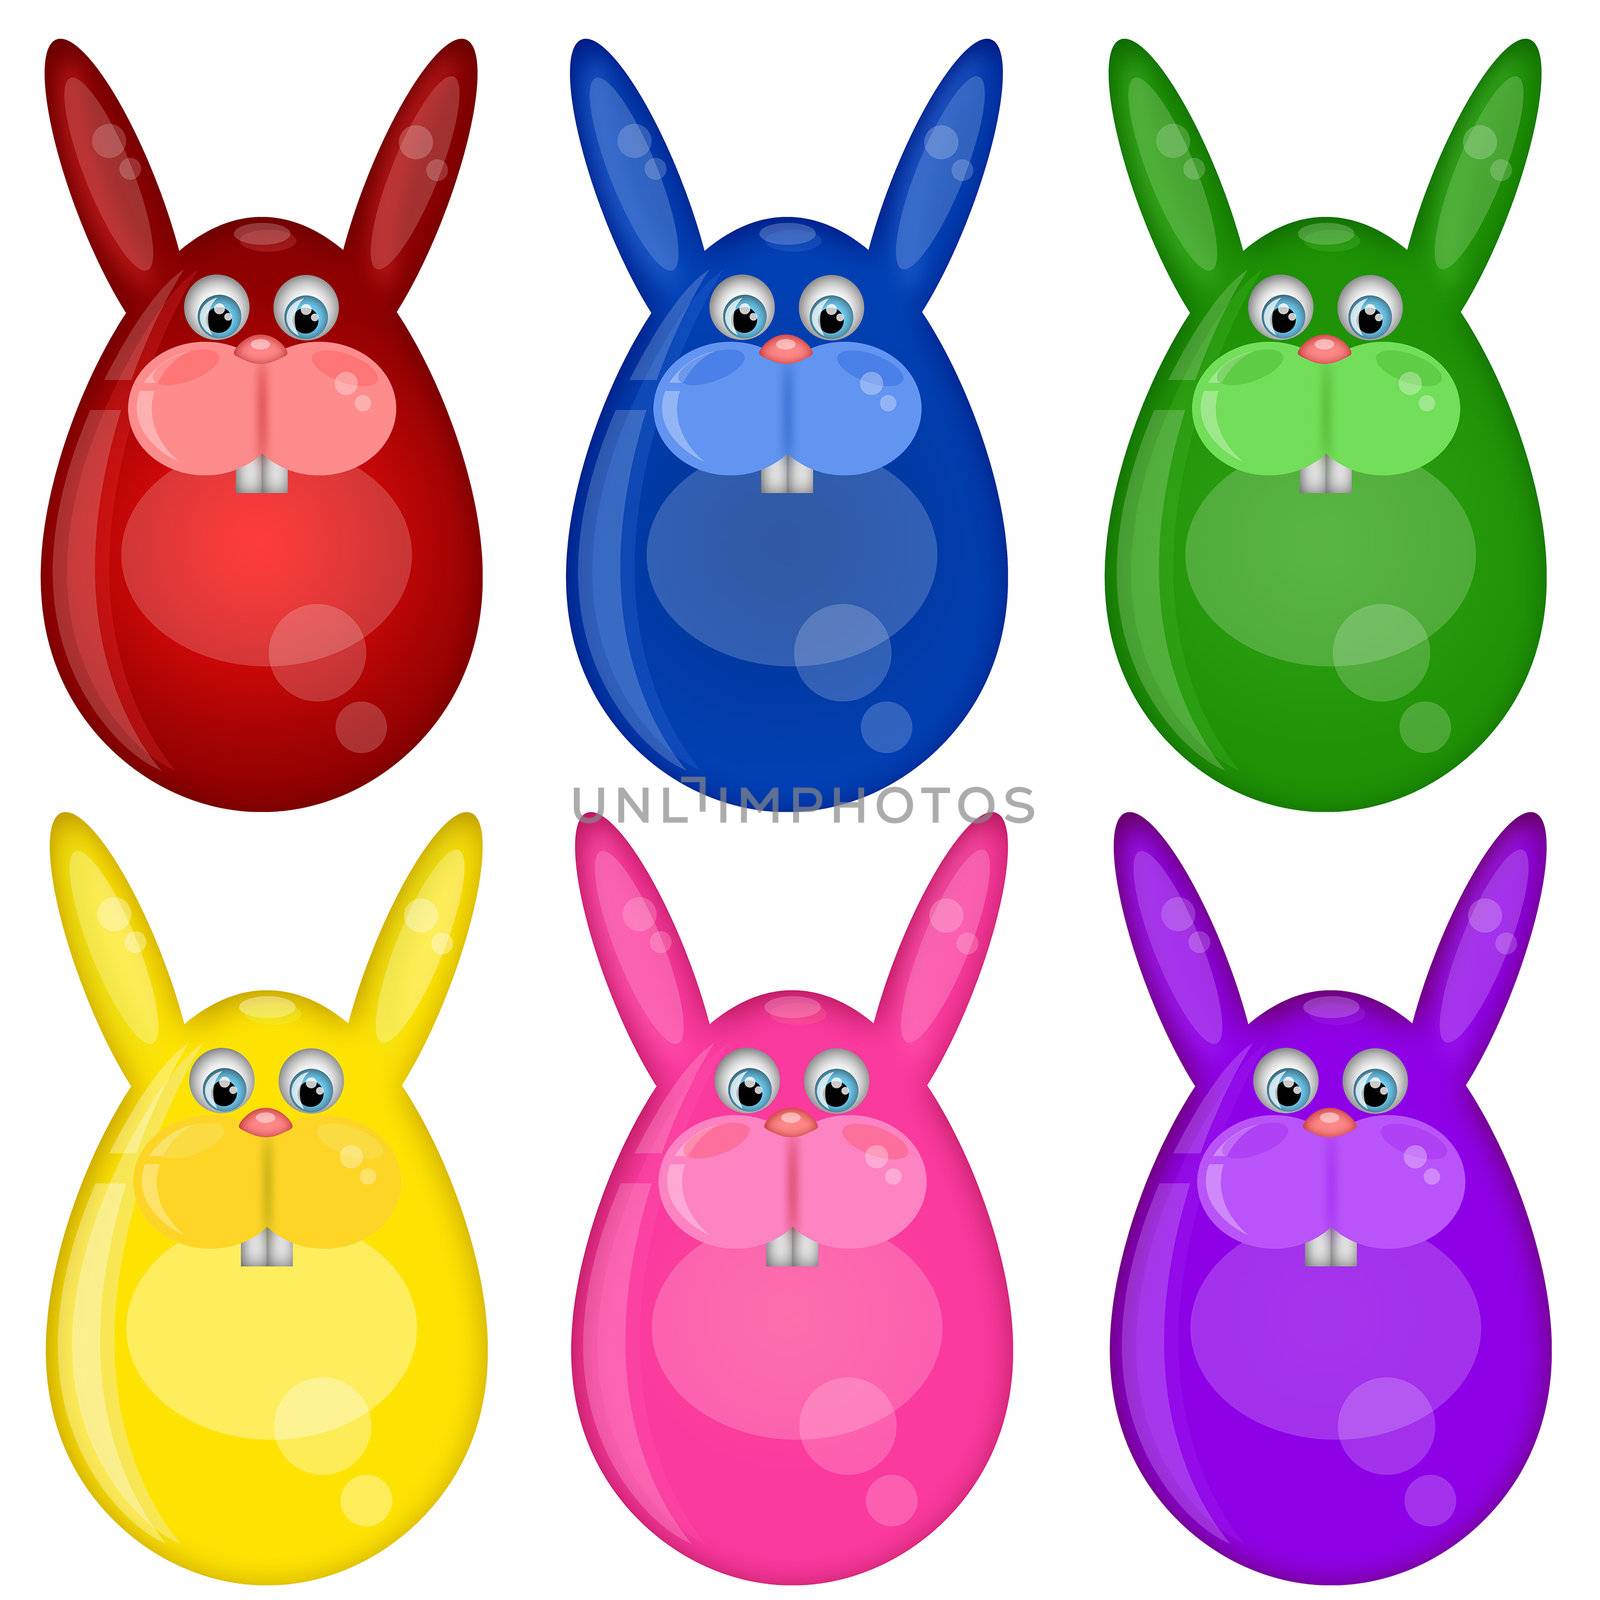 Six Colored Happy Easter Bunny Eggs by Davidgn